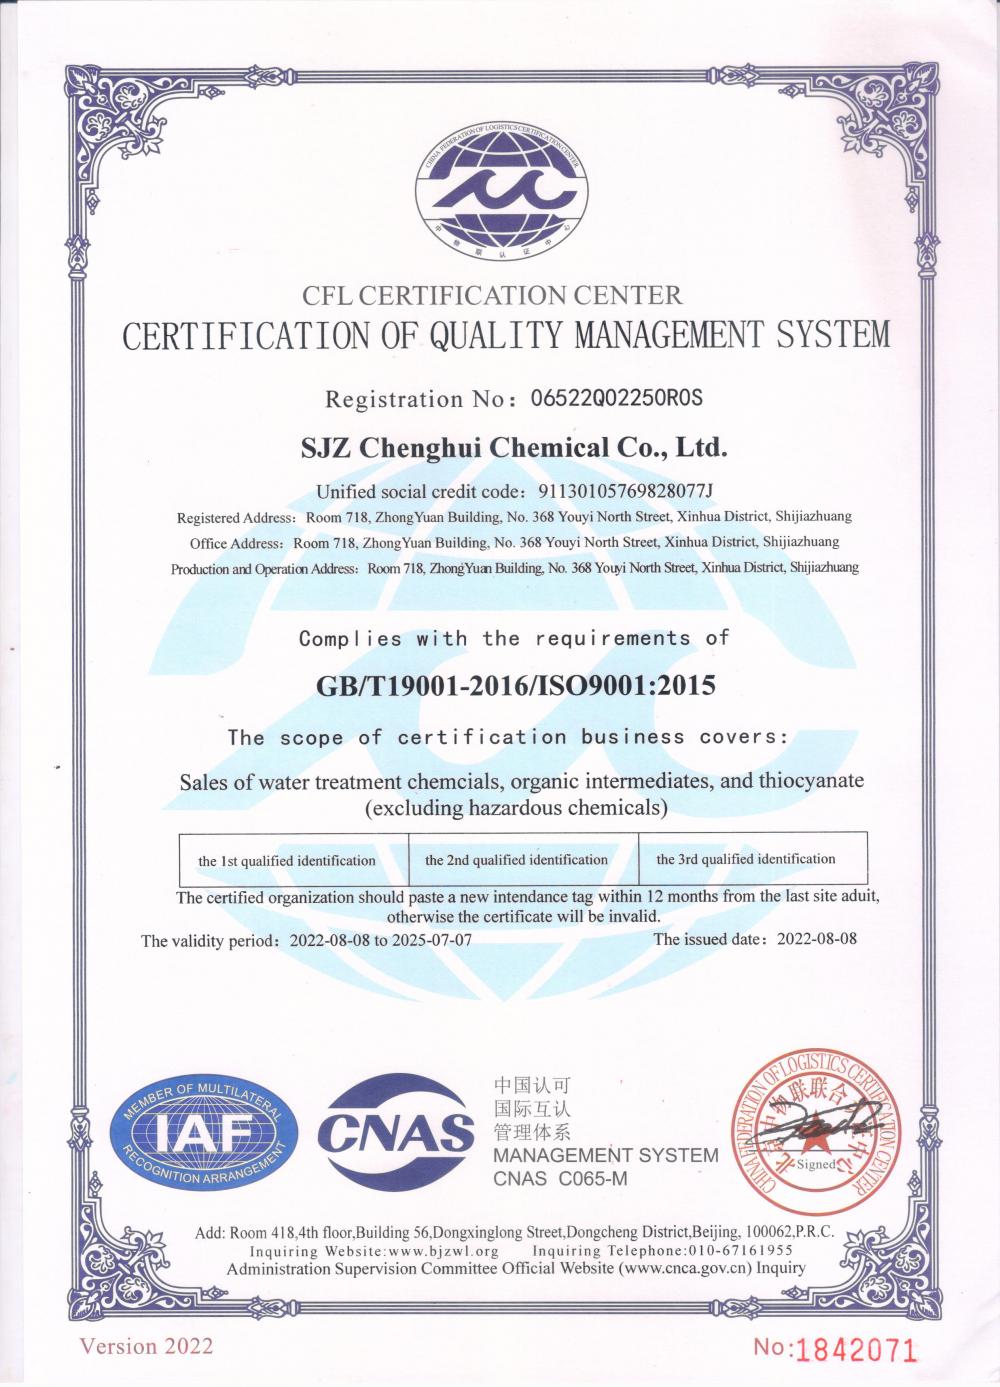 CERTIFICATION OF QUALITY MANAGEMENT SYSTEM